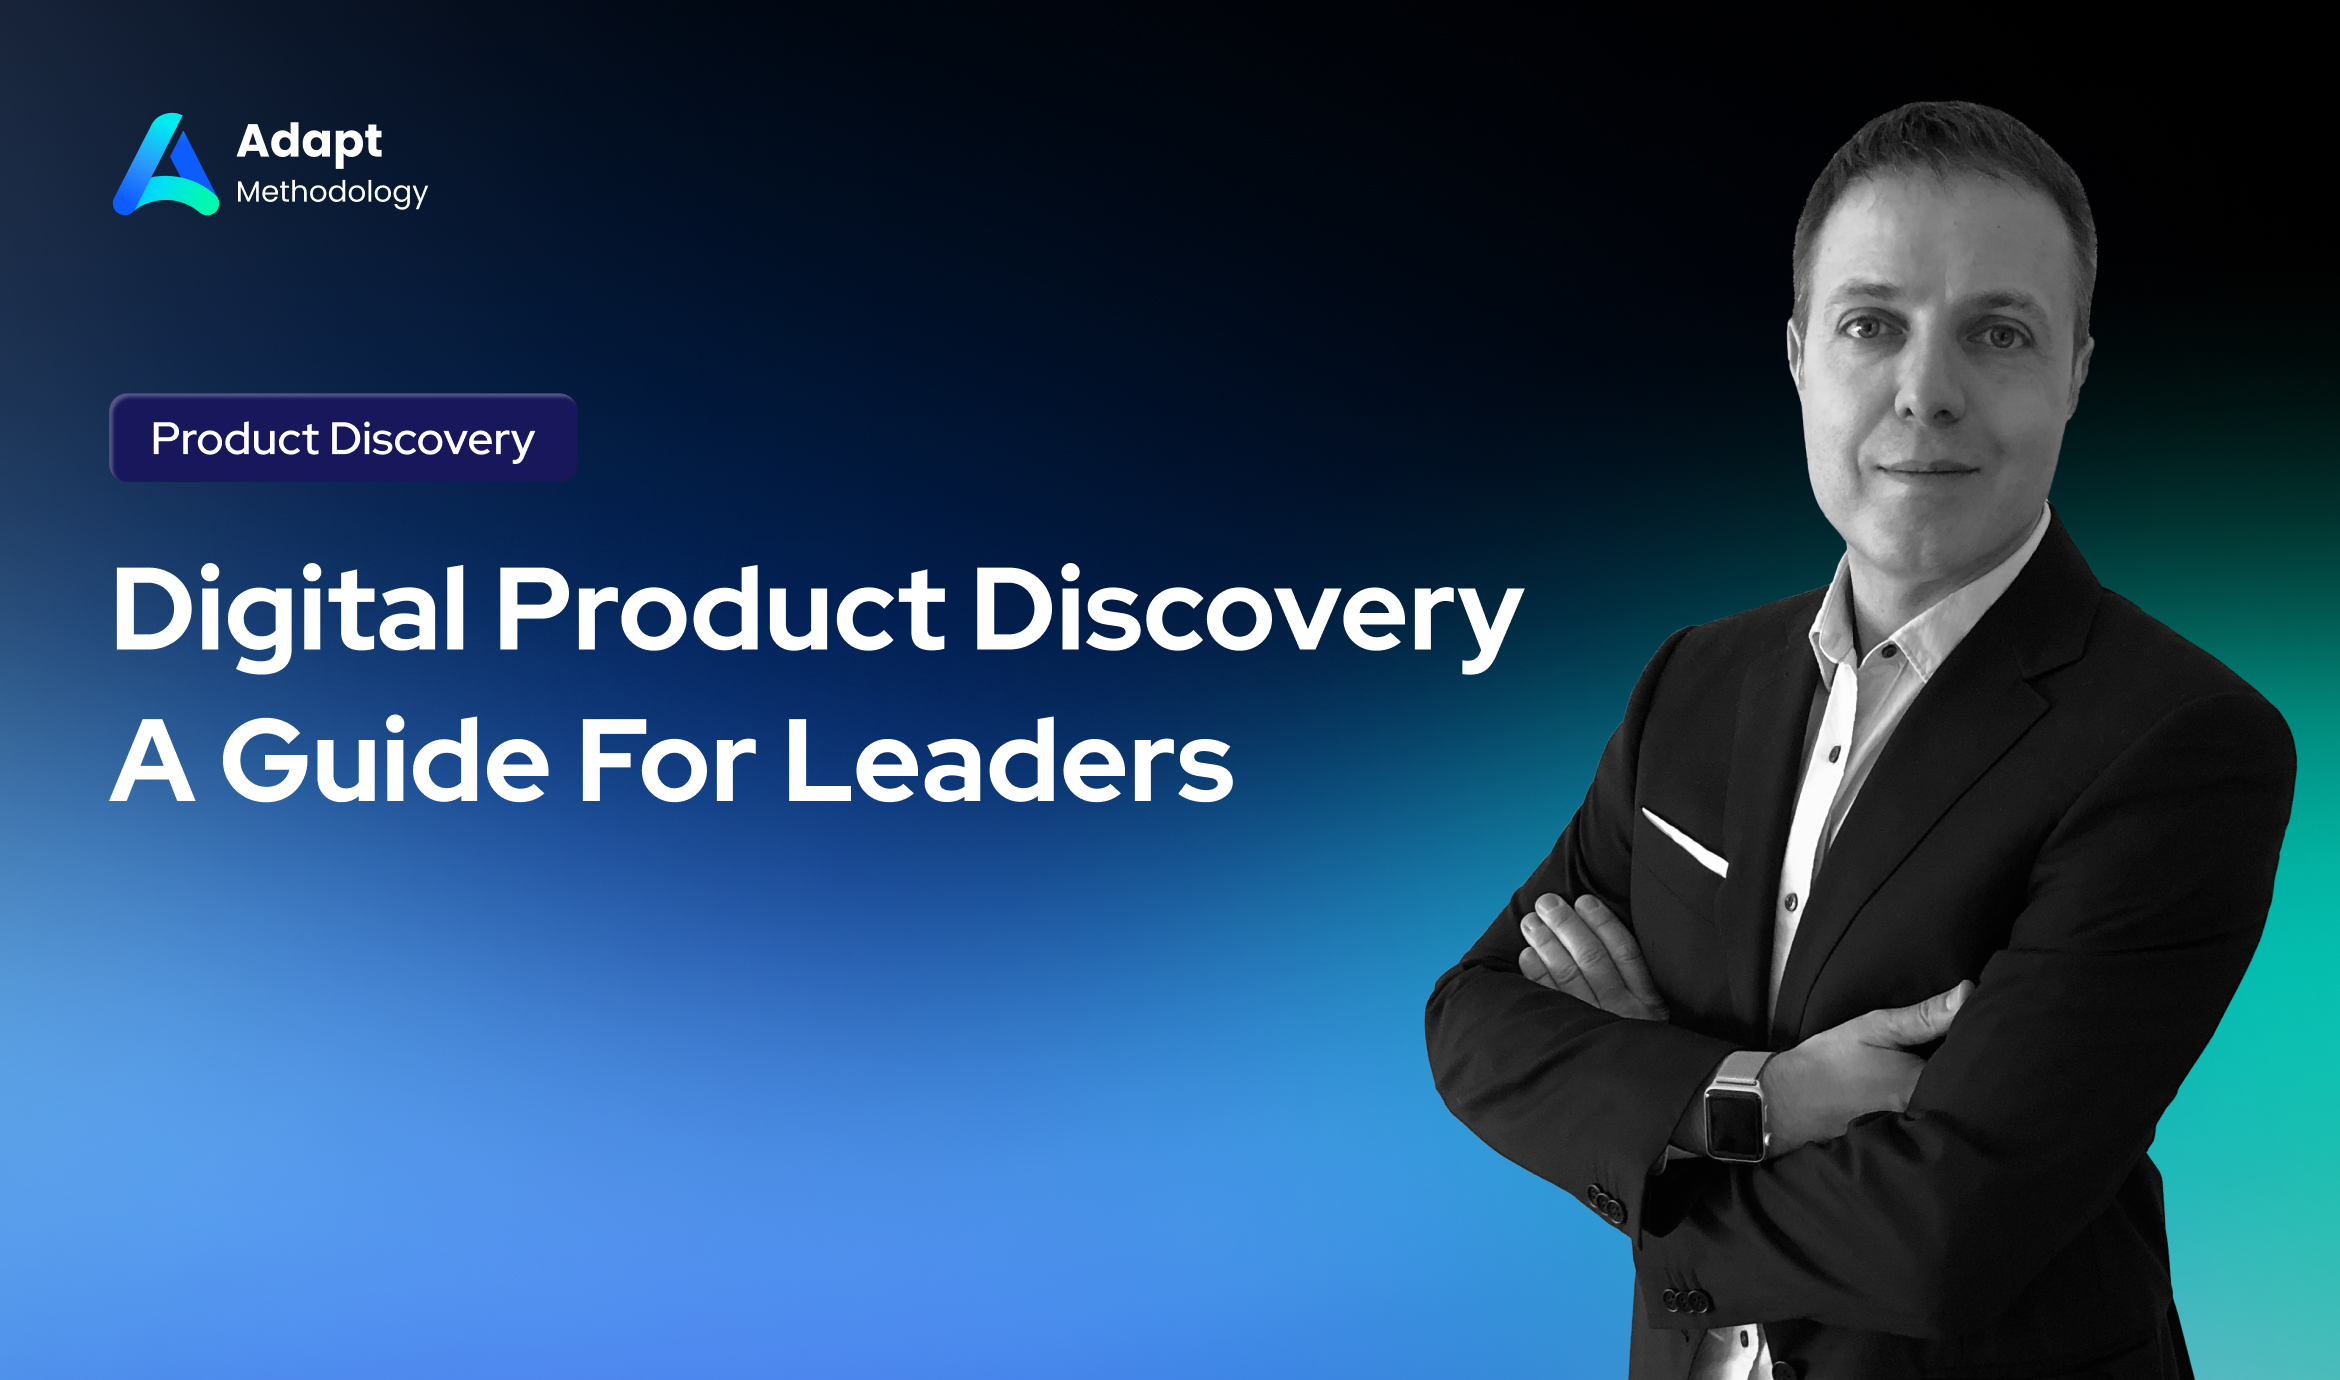 Digital Product Discovery - A Guide For Leaders